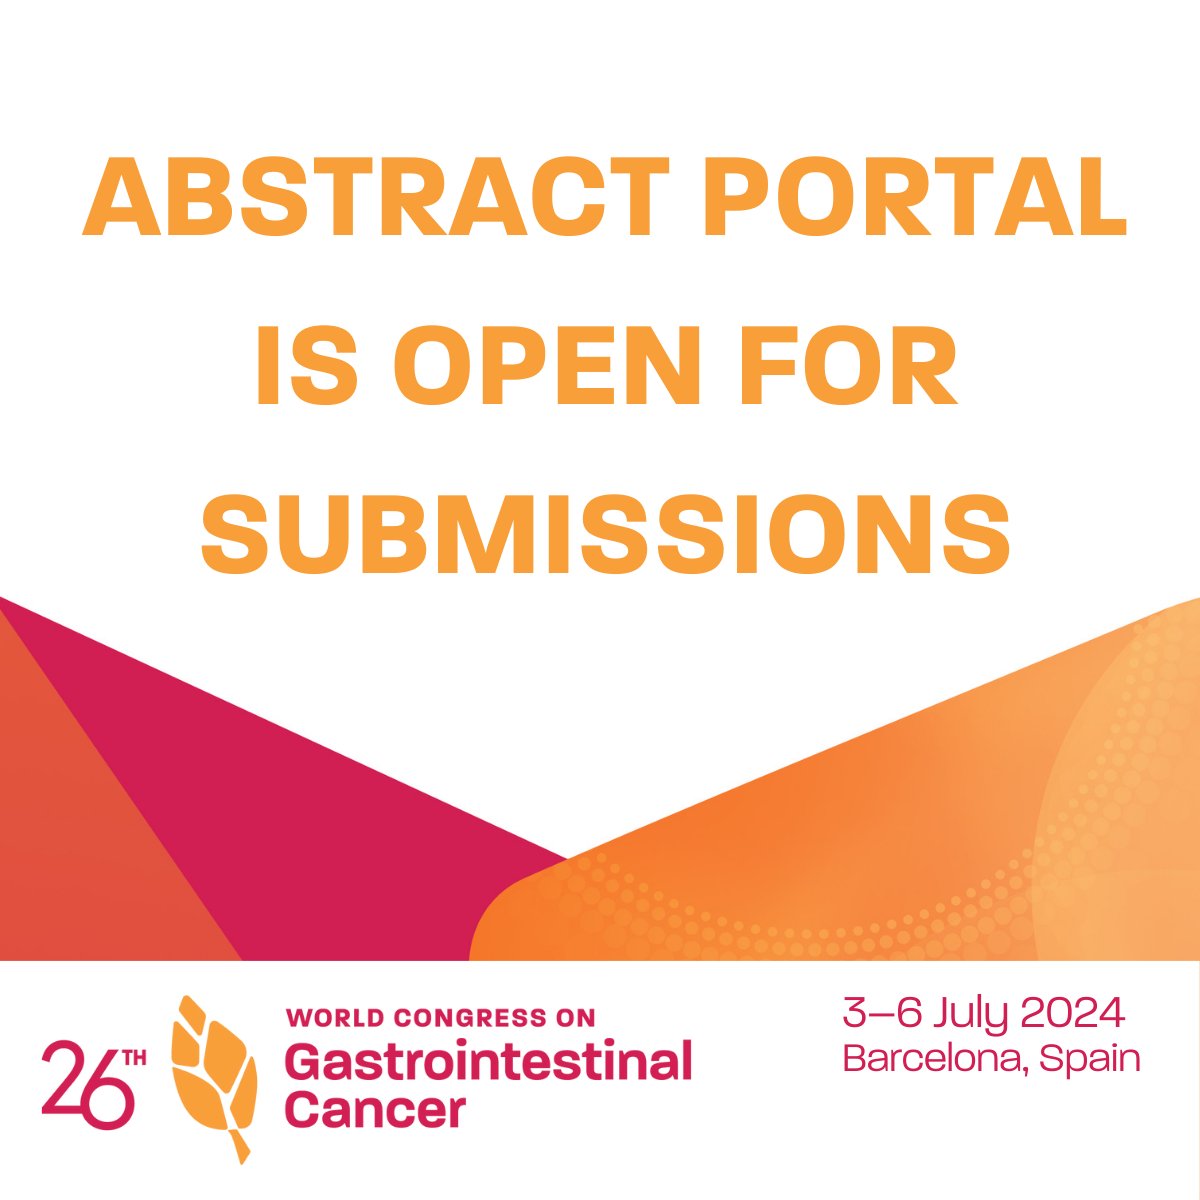 Attention researchers! We invite you to share your groundbreaking discoveries in GI cancer research on our esteemed global platform. Be a catalyst for new discussions and advancements that benefit patients worldwide. Submit your abstract today. hmpglobalevents.com/wgi/abstracts…